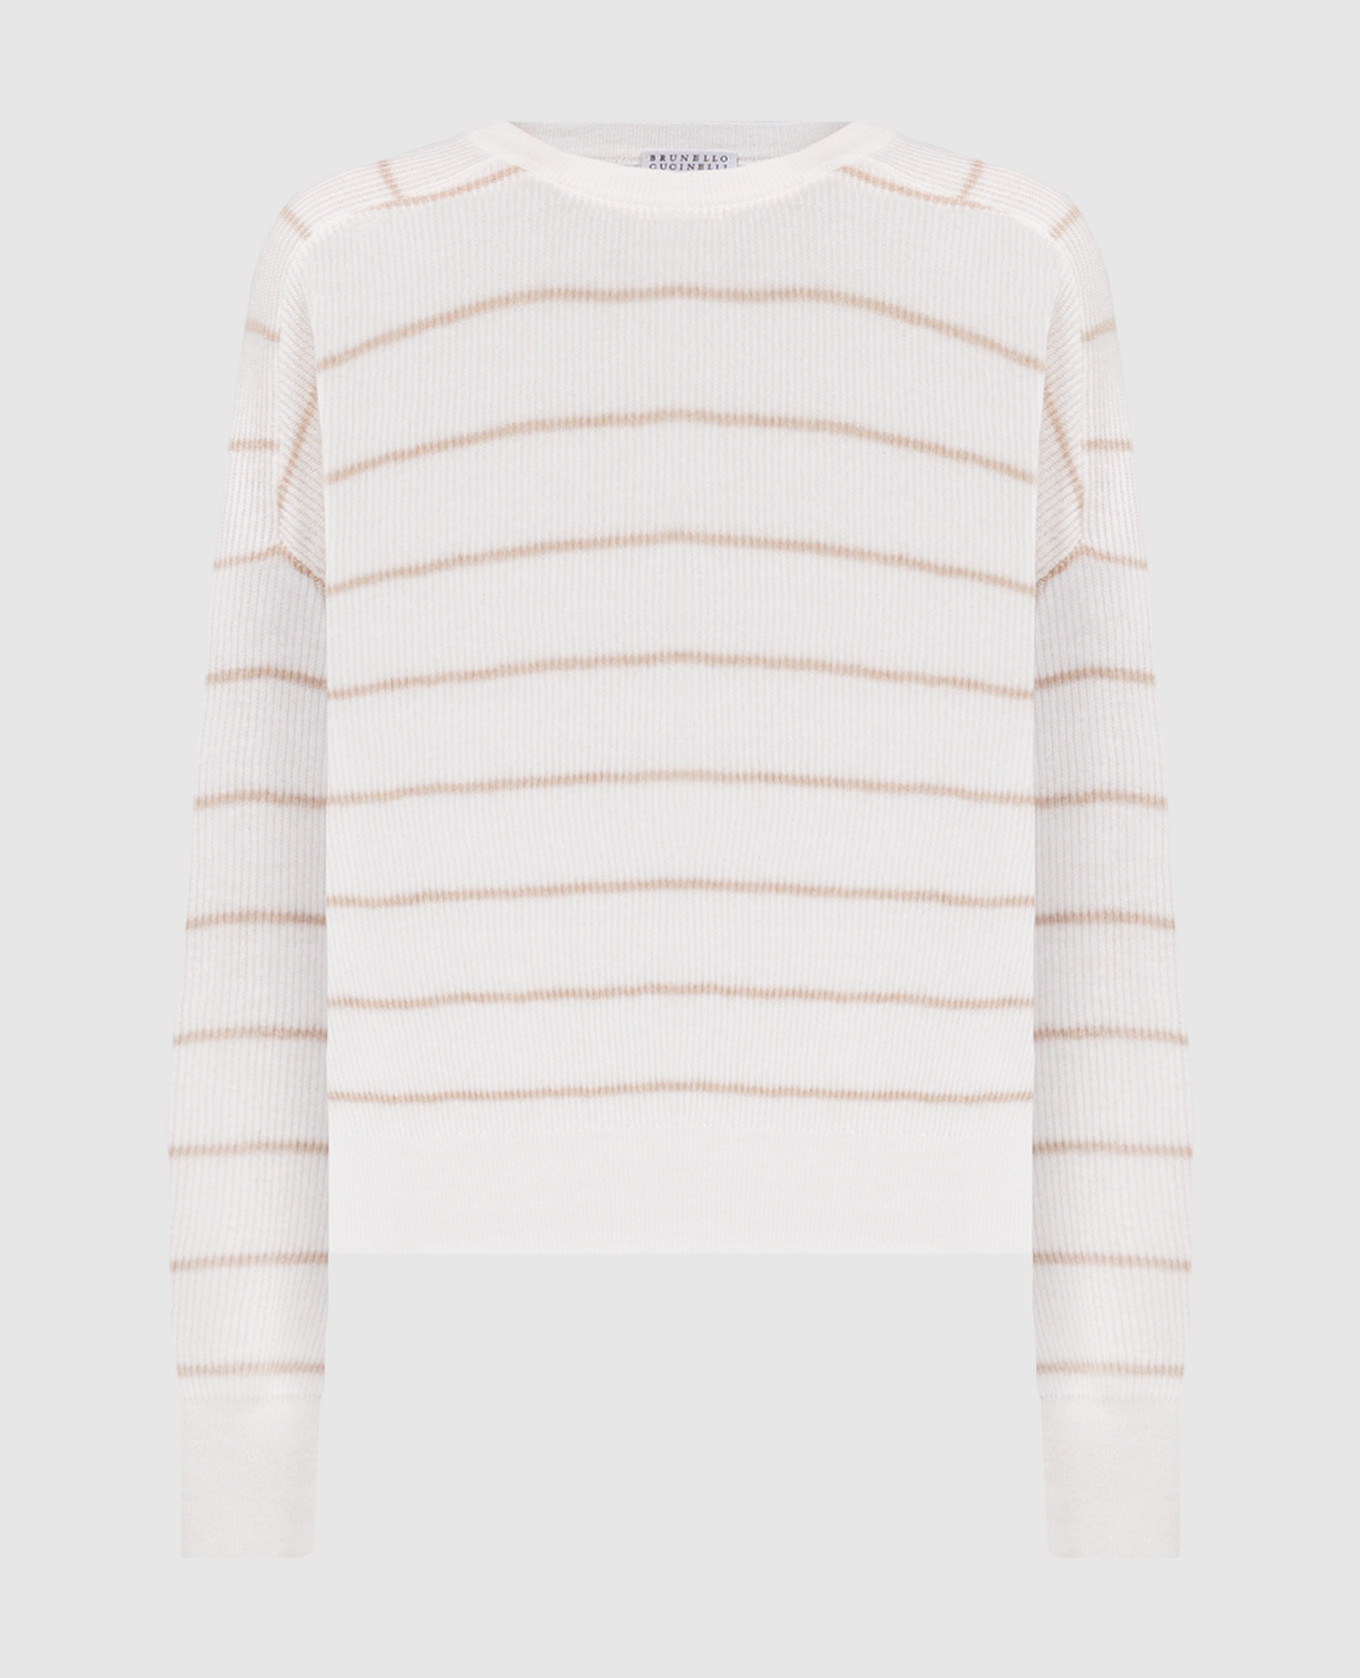 White striped sweater with monil chain